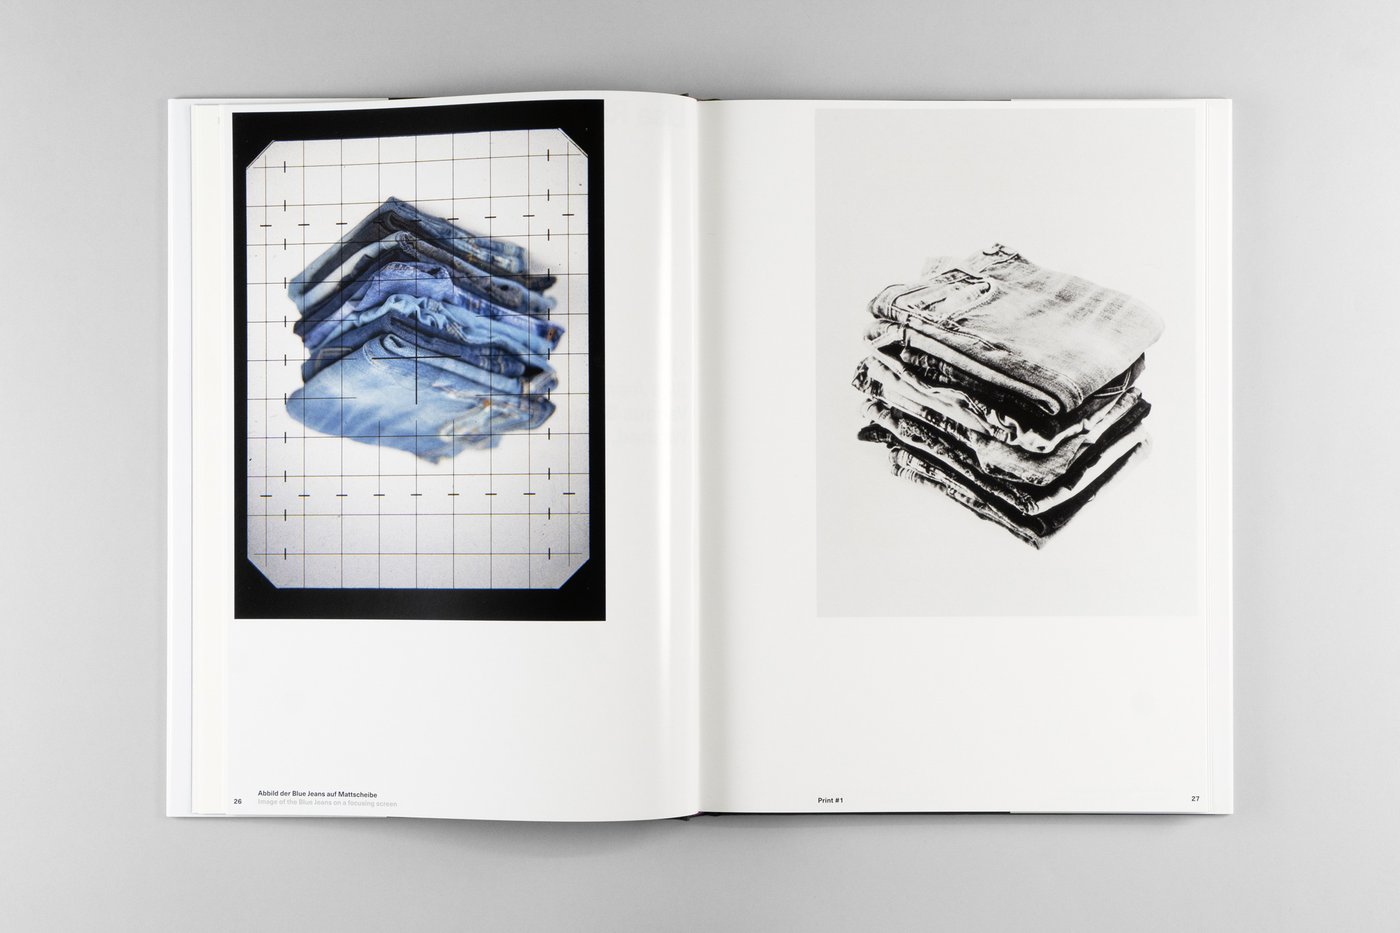 Double page from the book Photography as Motif with a photo spread by Lisa Rastl showing pictures of folded and stacked pairs of jeans, on the left in color and rotated by 180 degrees, on the right in grayscale.